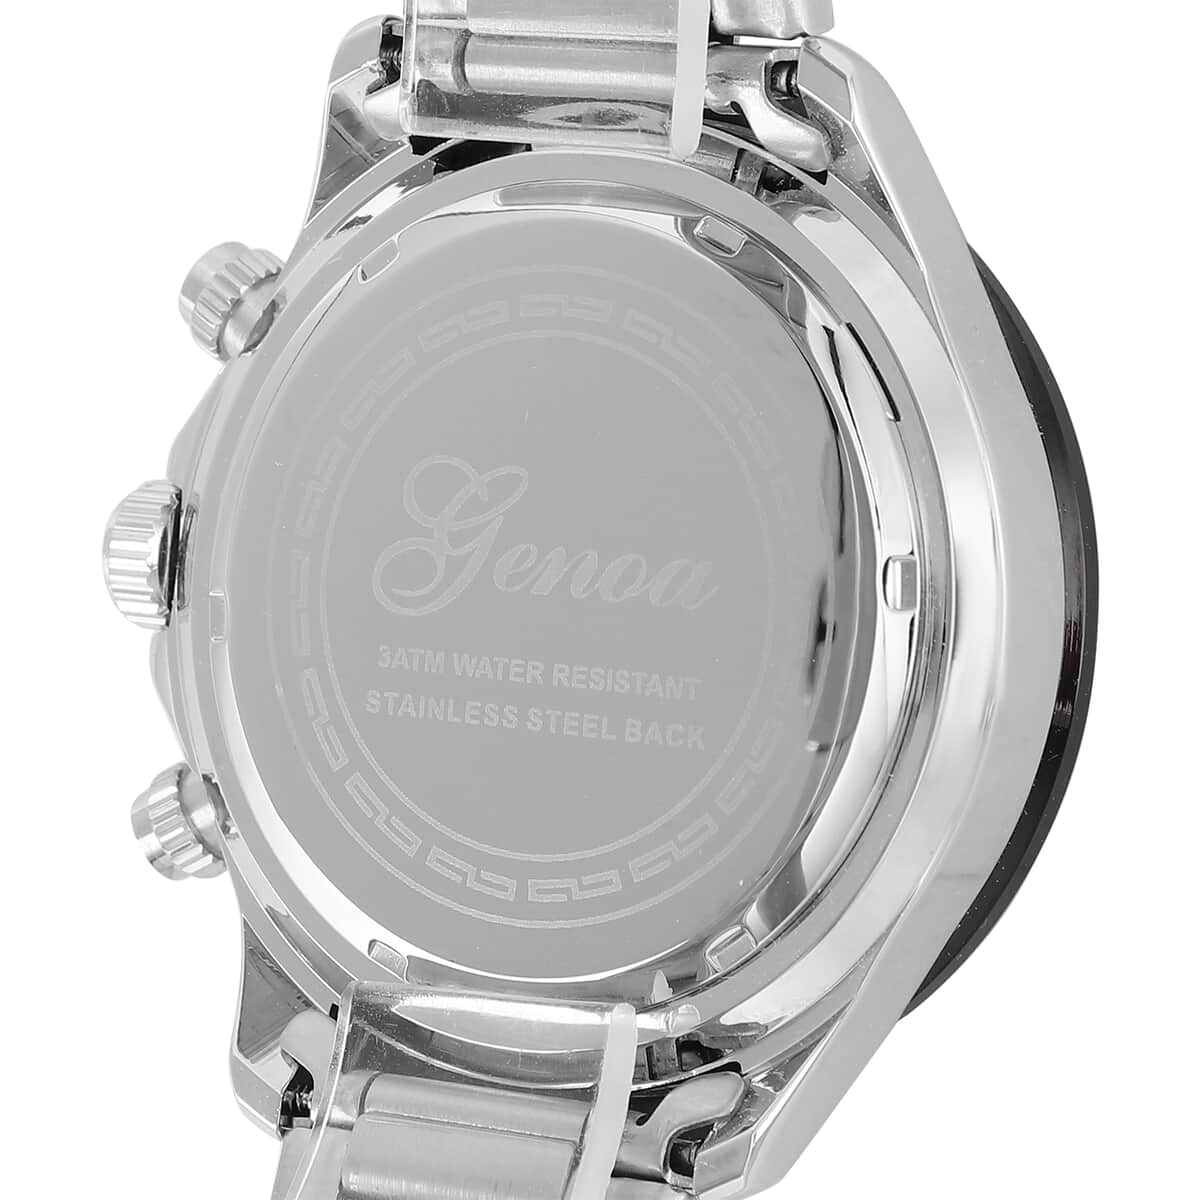 GENOA Multi-Functional Quartz Movement Watch with White Dial & Stainless Steel Strap (44 mm) image number 5